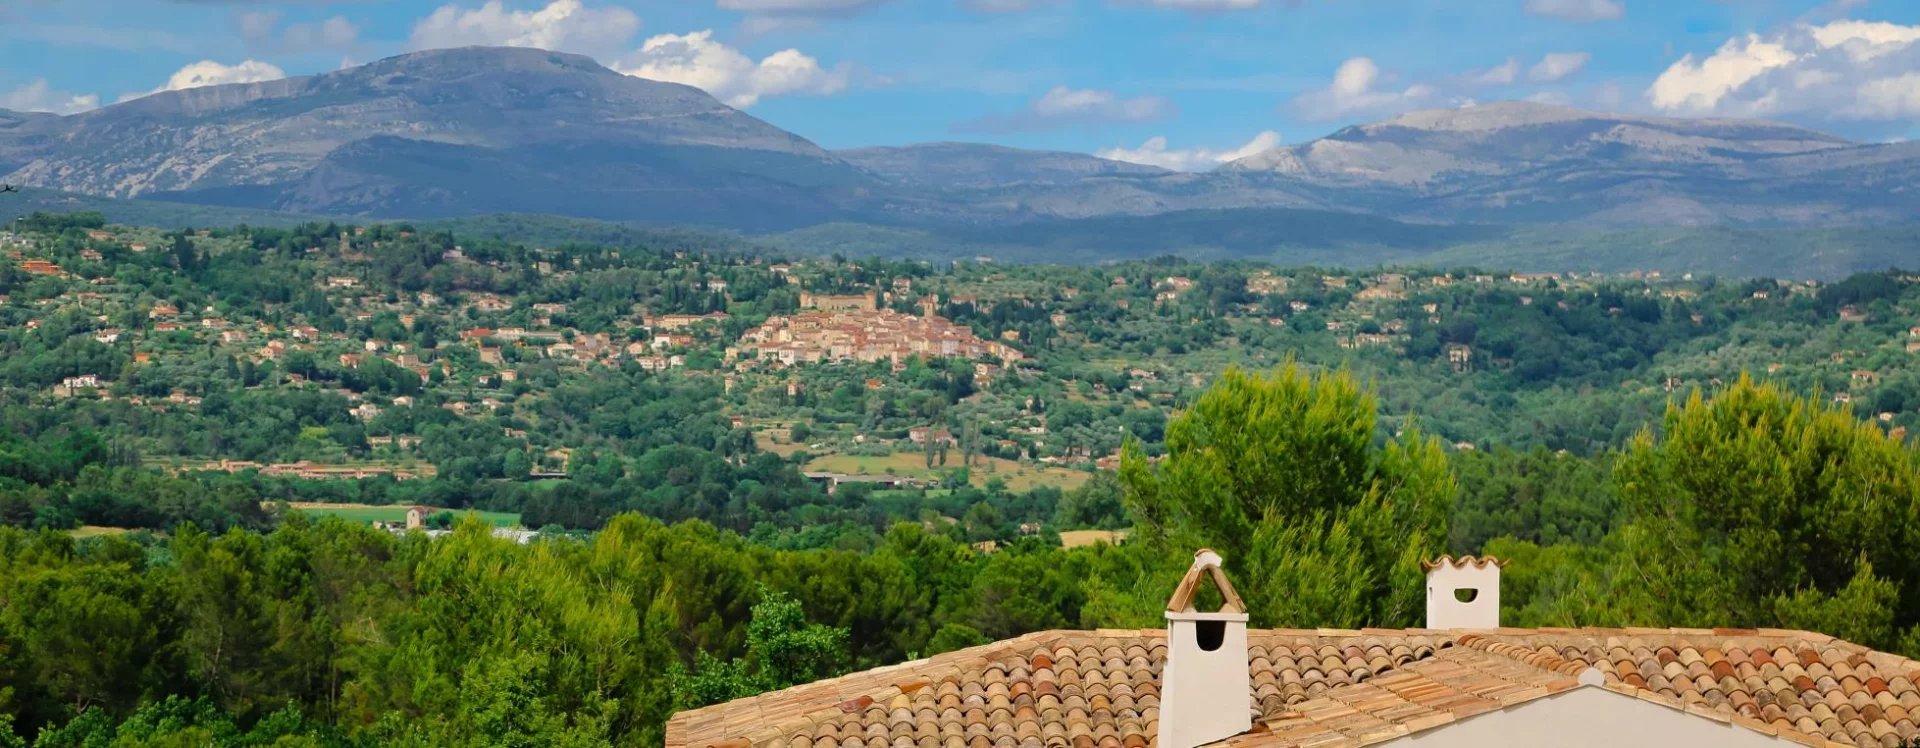 A Property to Develop as Your Own in Torrettes France